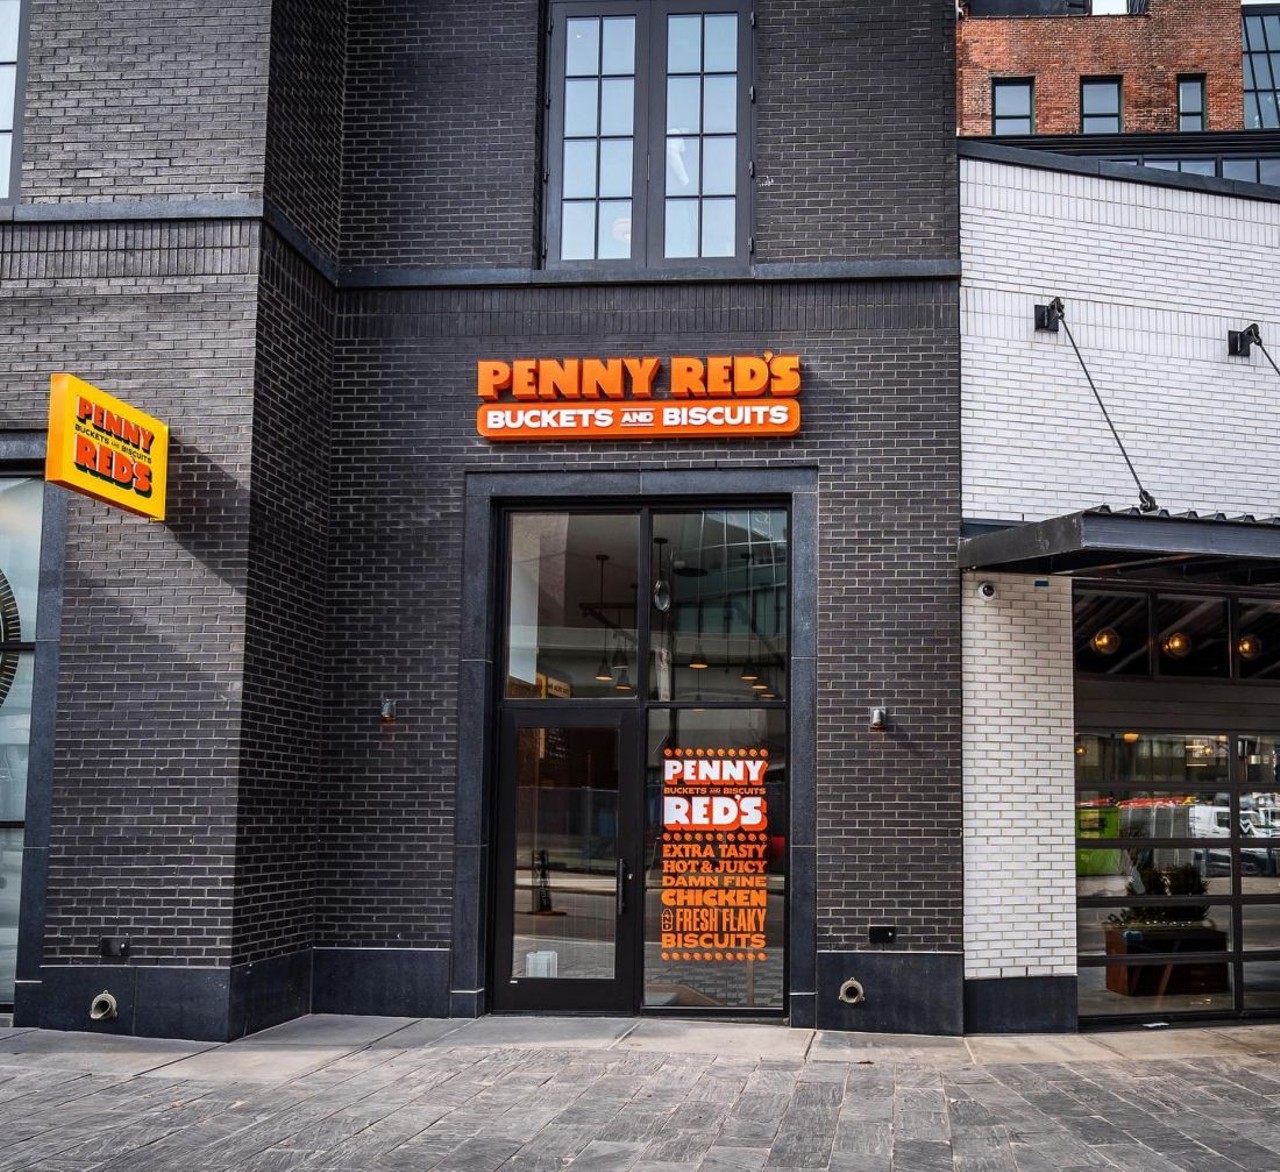 Penny Red&#146;s
1400 Woodward Ave., Detroit
Located in the Shinola Hotel, this fried chicken restaurant and beer hall serves buckets of chicken, biscuits, several sides, and chicken sandwiches. 
Photo via  Eat Penny Reds / Facebook 